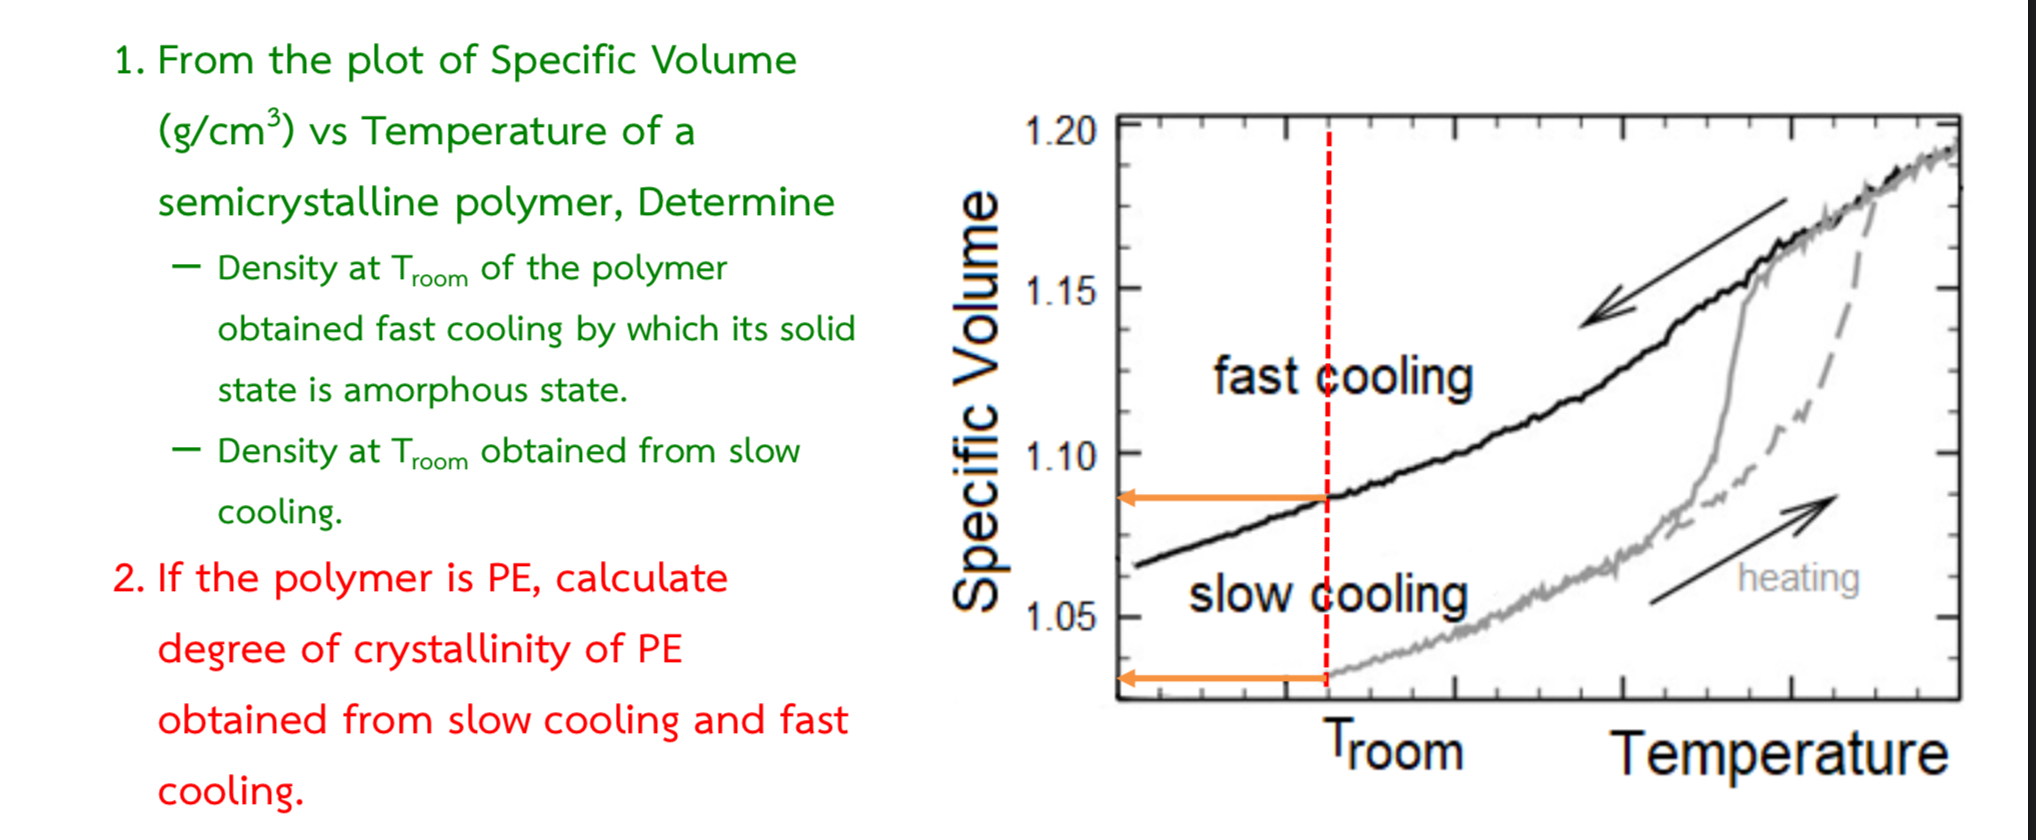 1. From the plot of Specific Volume
(g/cm³) vs Temperature of a
1.20
semicrystalline polymer, Determine
- Density at Troom of the polymer
1.15
obtained fast cooling by which its solid
fast çooling
state is amorphous state.
Density at Troom obtained from slow
1.10
cooling.
2. If the polymer is PE, calculate
slow cooling
heating
1.05
degree of crystallinity of PE
obtained from slow cooling and fast
Troom
Temperature
cooling.
Specific Volume
